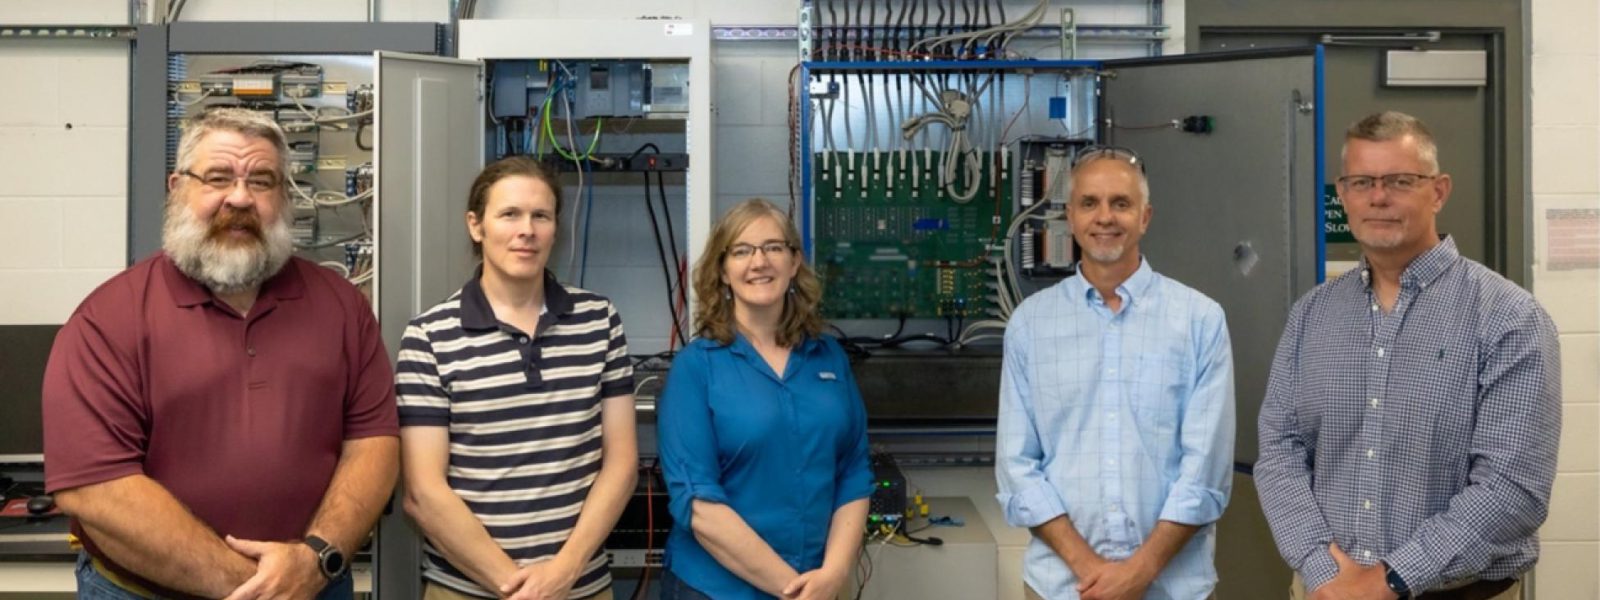 The team involved in the development of radiation hardened electronics for US ITER includes (left to right): Frank Ivester, Shane Frank, Claudell Harvey, Nance Ericson and Kurt Vetter.